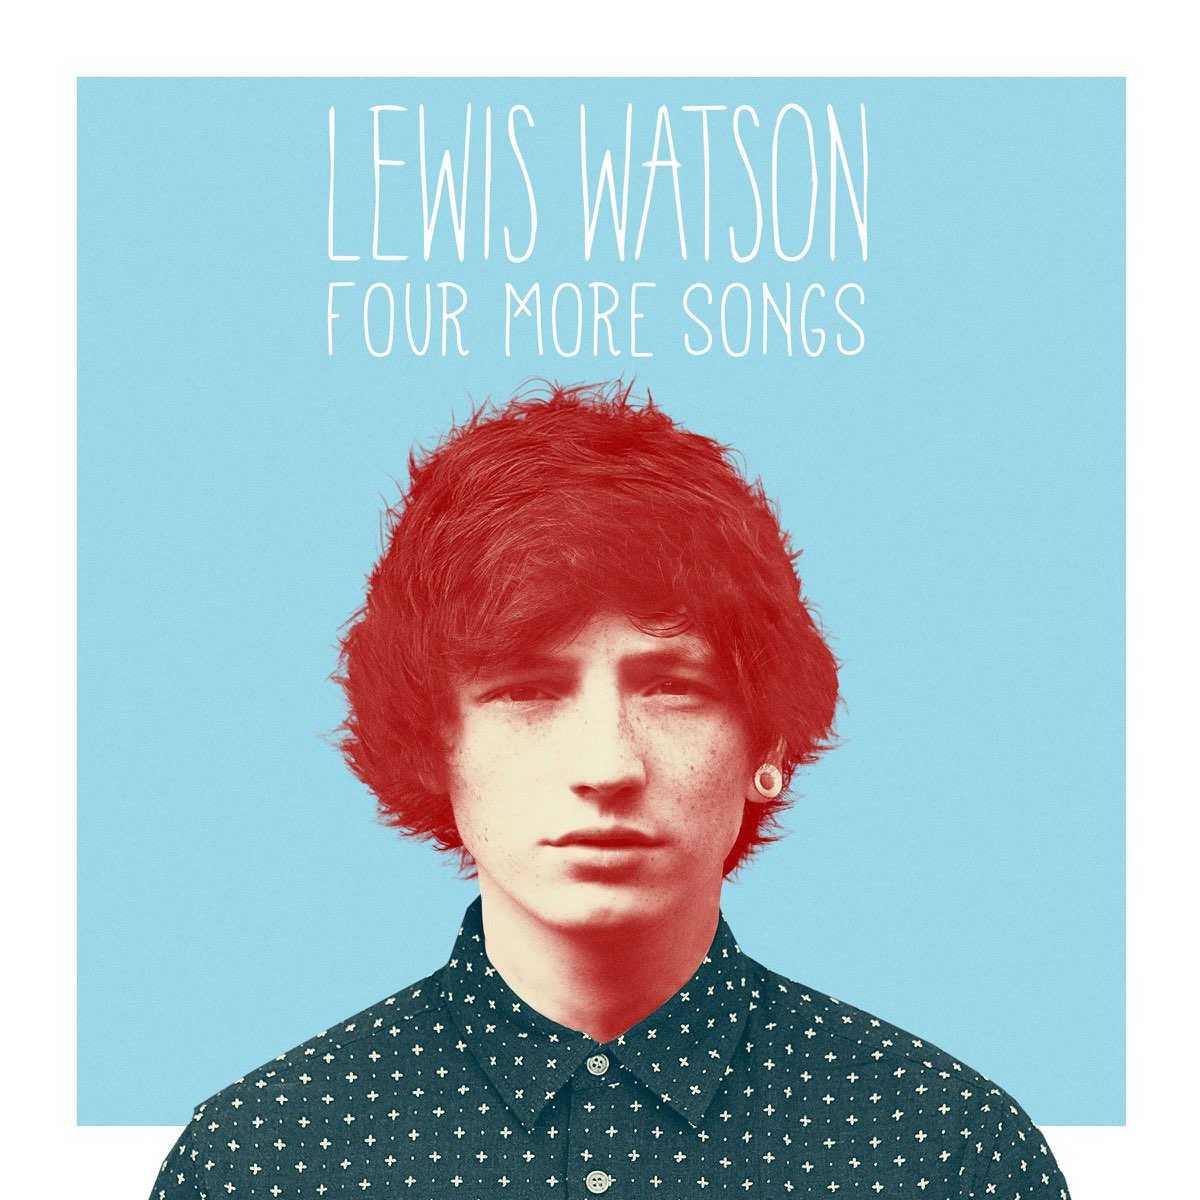 Lewis Watson Four More Songs cover artwork